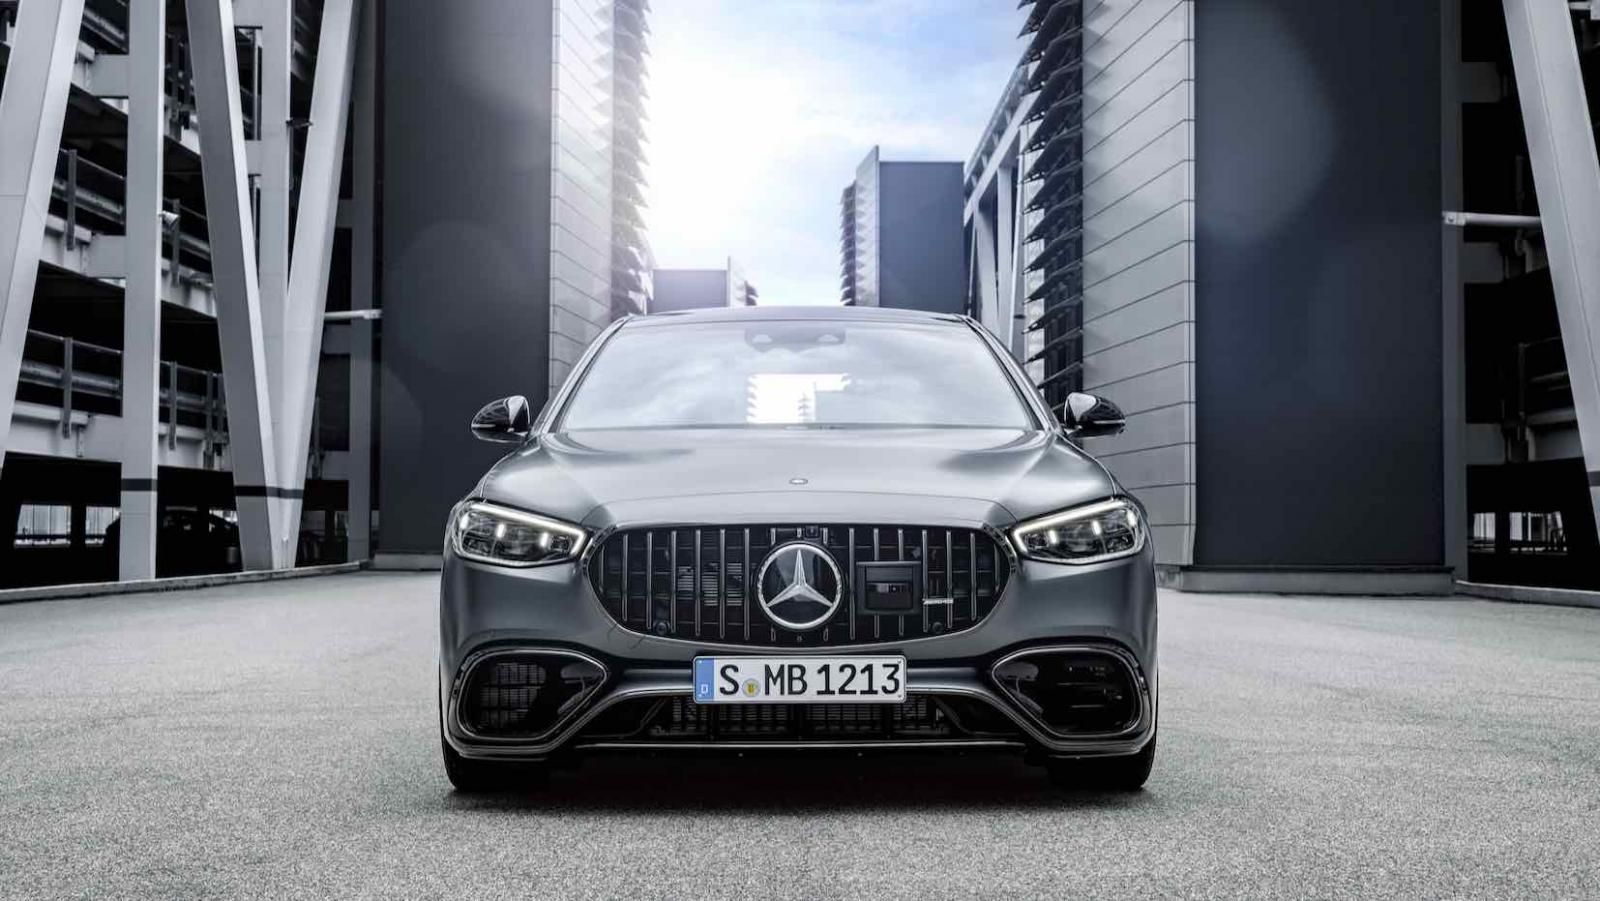 Mercedes-AMG S 63 E Performance, frontale